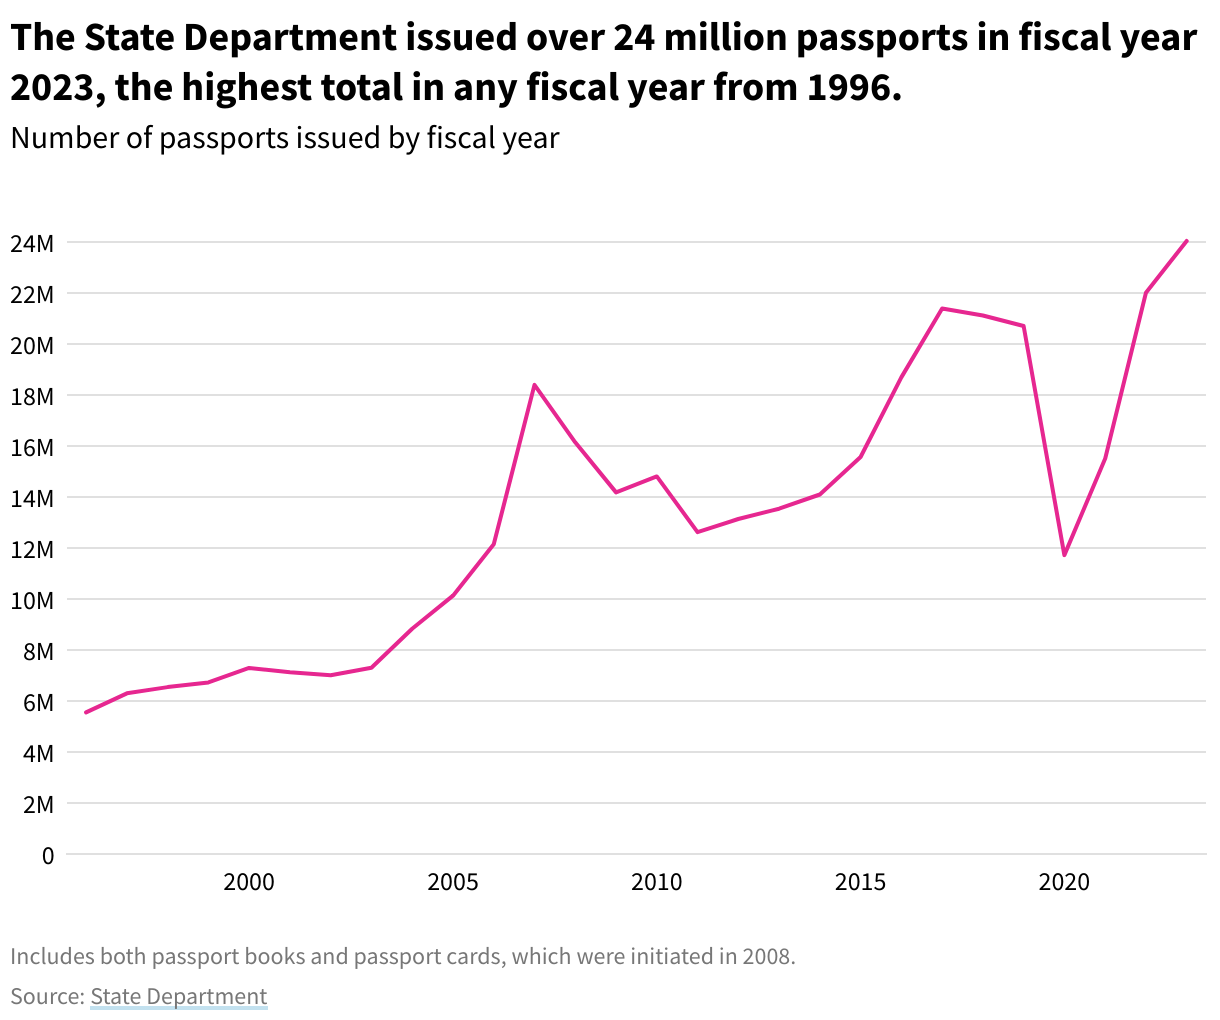 A line chart showing the number of passports issued by fiscal year. The line peaks in fiscal year 2023.